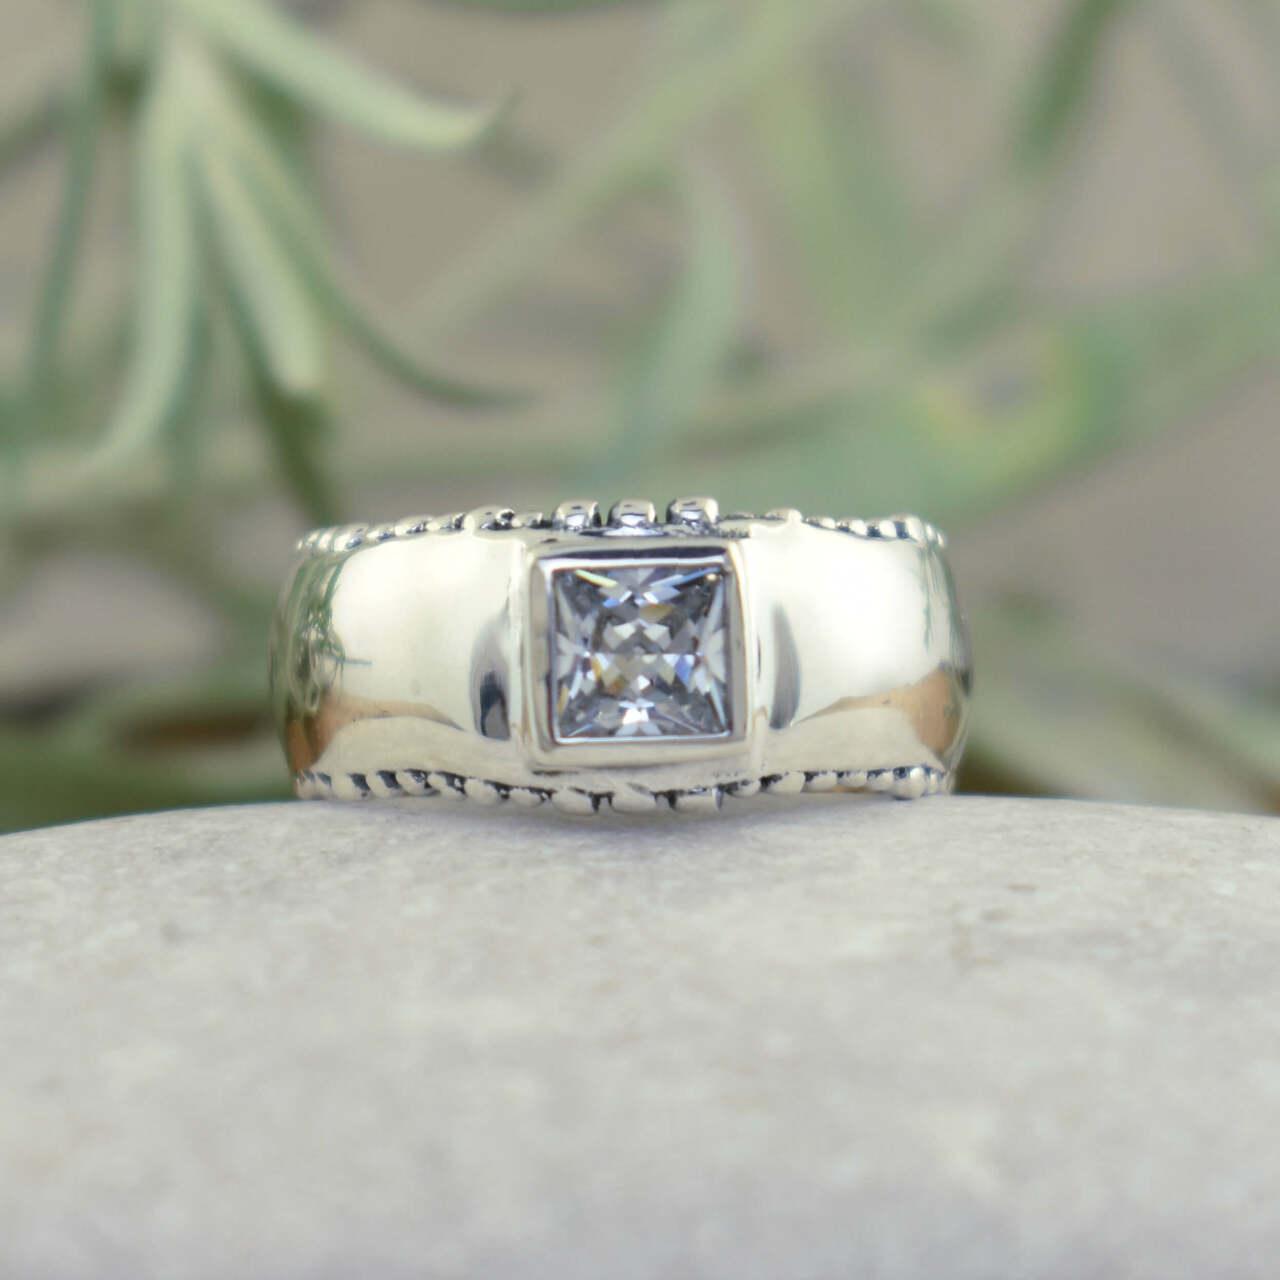 Designer .925 sterling silver ring with princess cut CZ stone